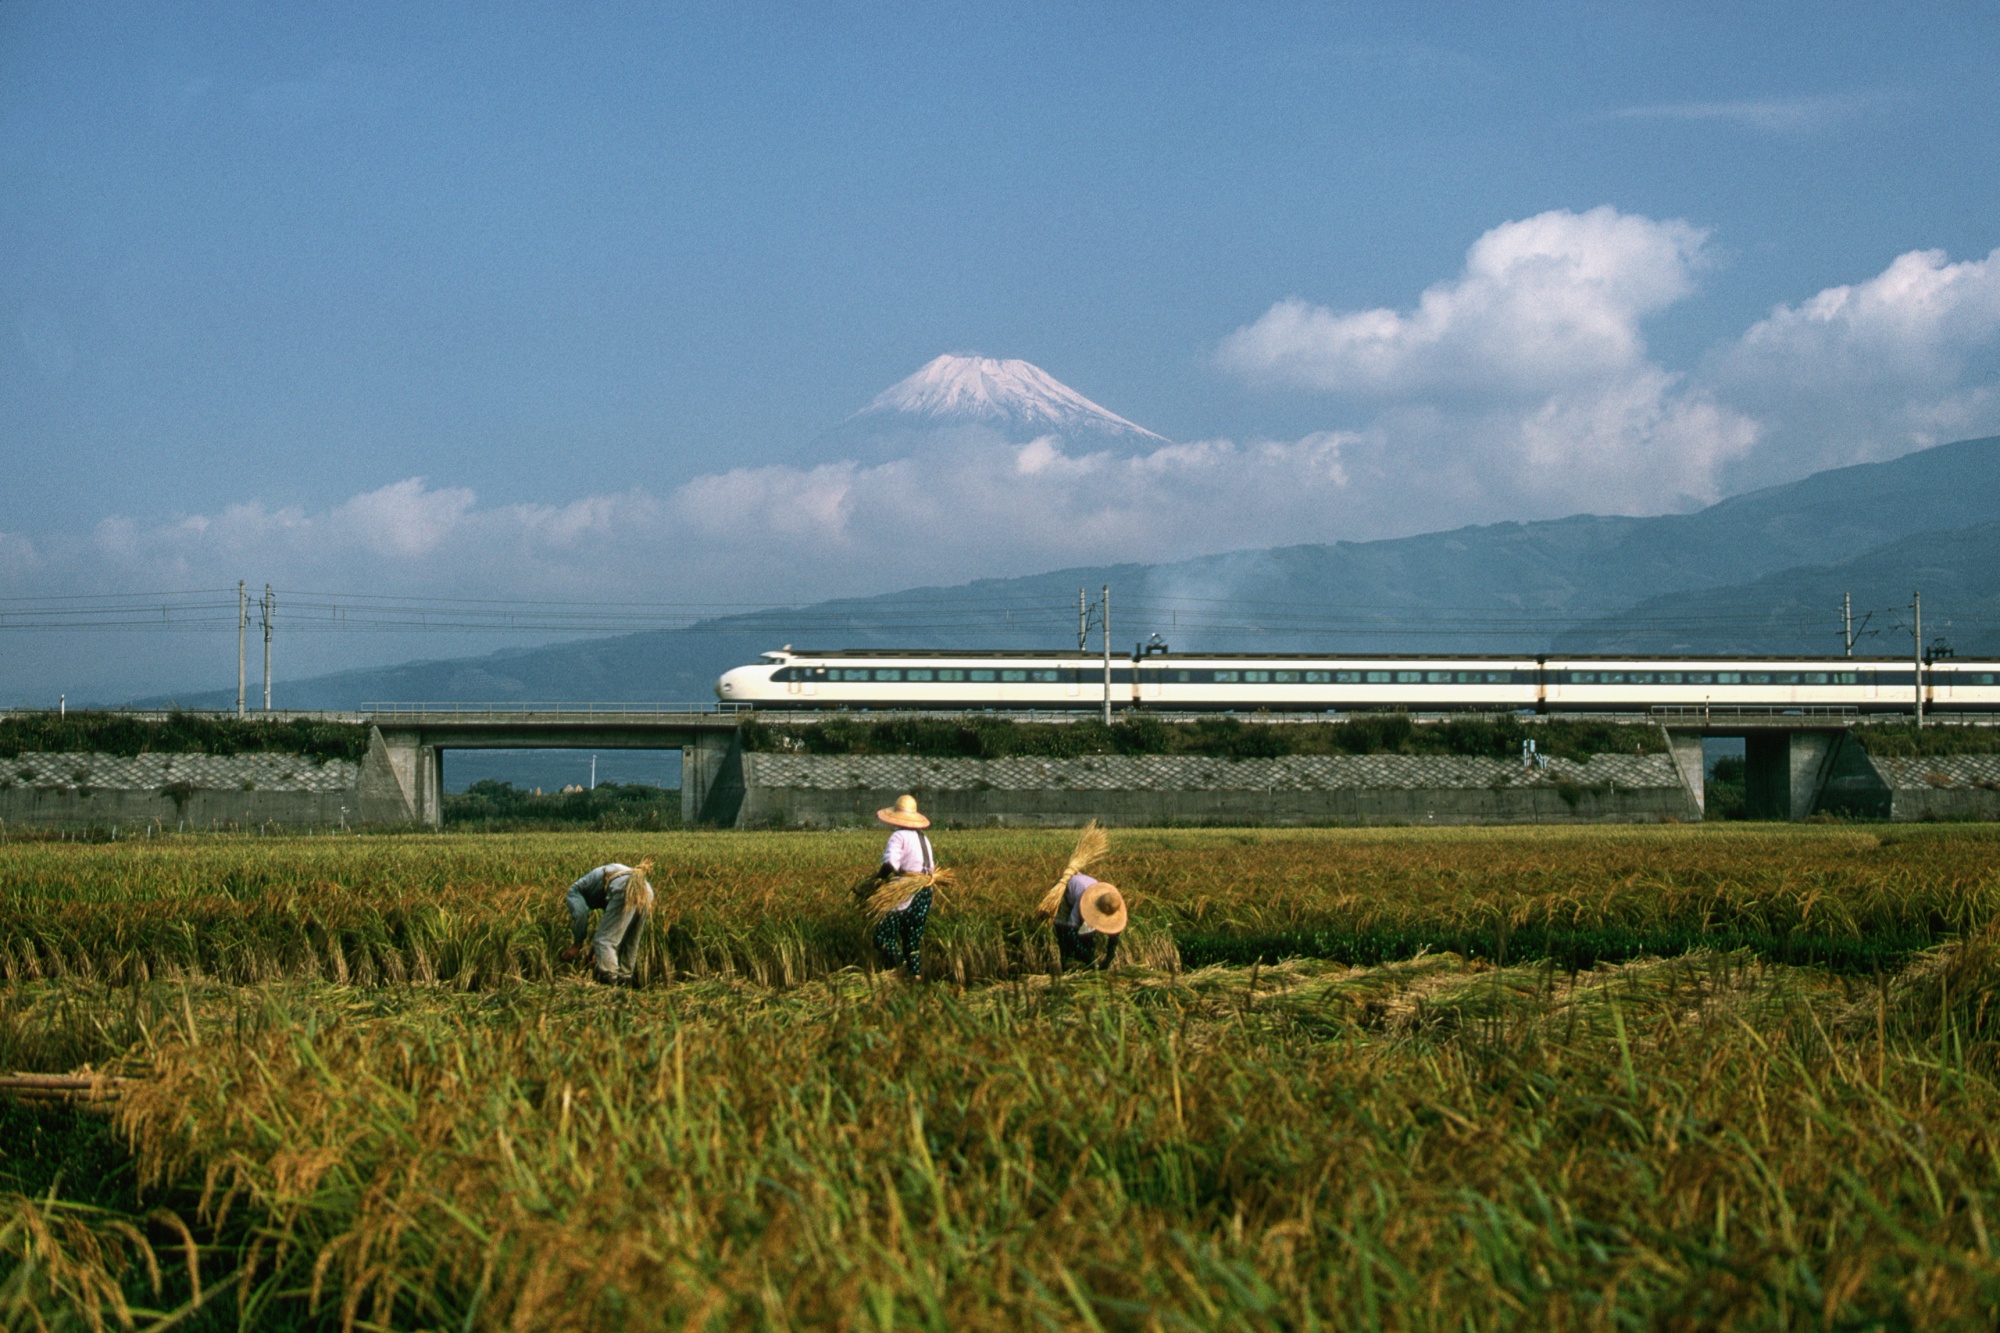 The ‘Shinkansen’ bullet train passing a rice field in 1968. The unveiling of the&nbsp;bullet&nbsp;heralded the dawn of a high-tech era in Japan.